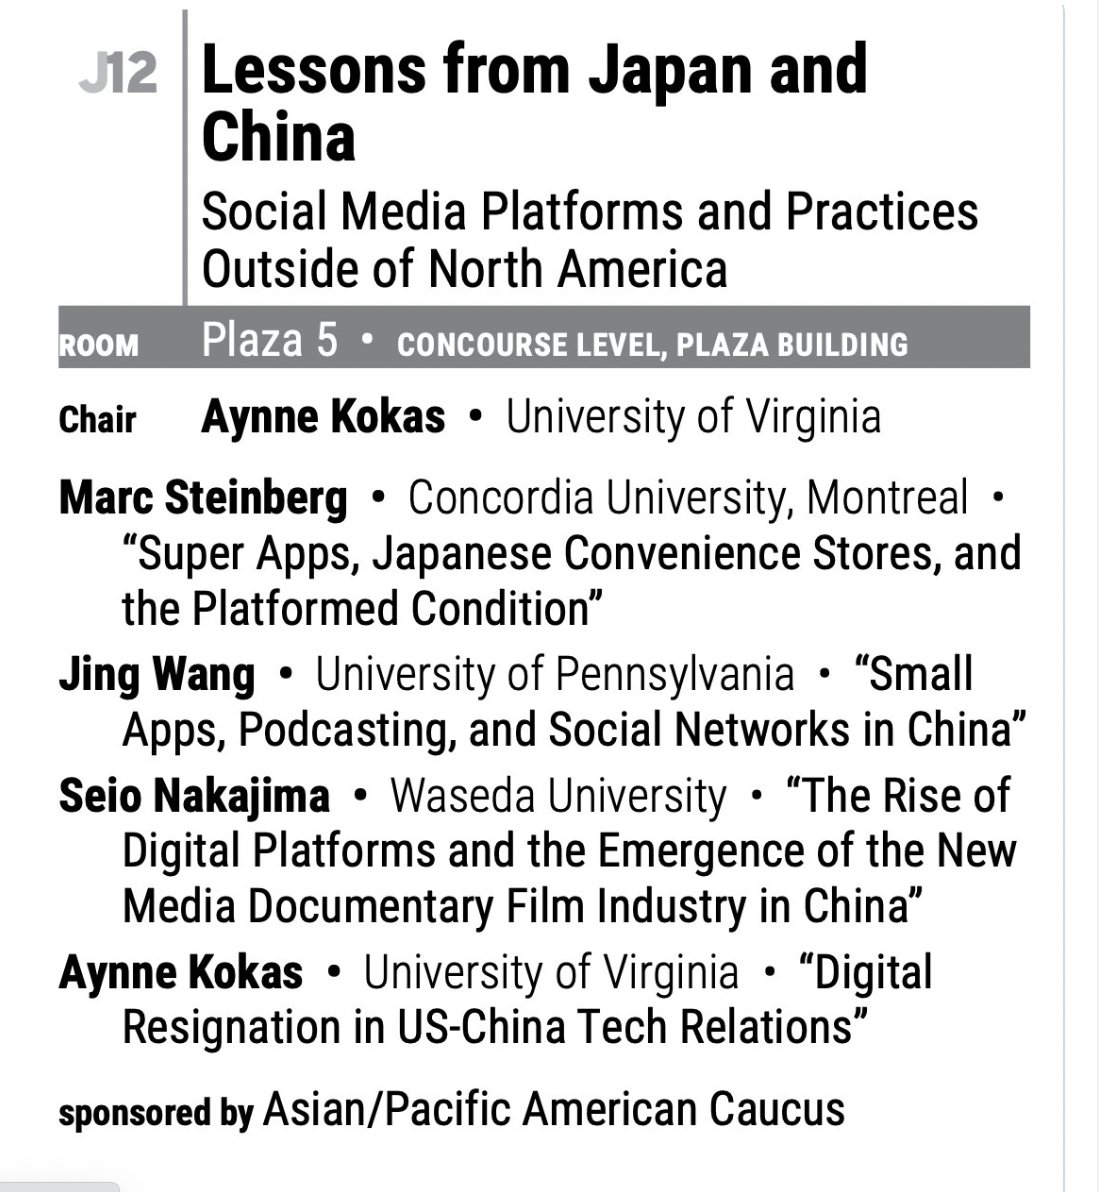 Today! at 11 am! in Plaza 5 at #SCMS23. We'll be discussing podcasting, documentary platforms and digital borders.